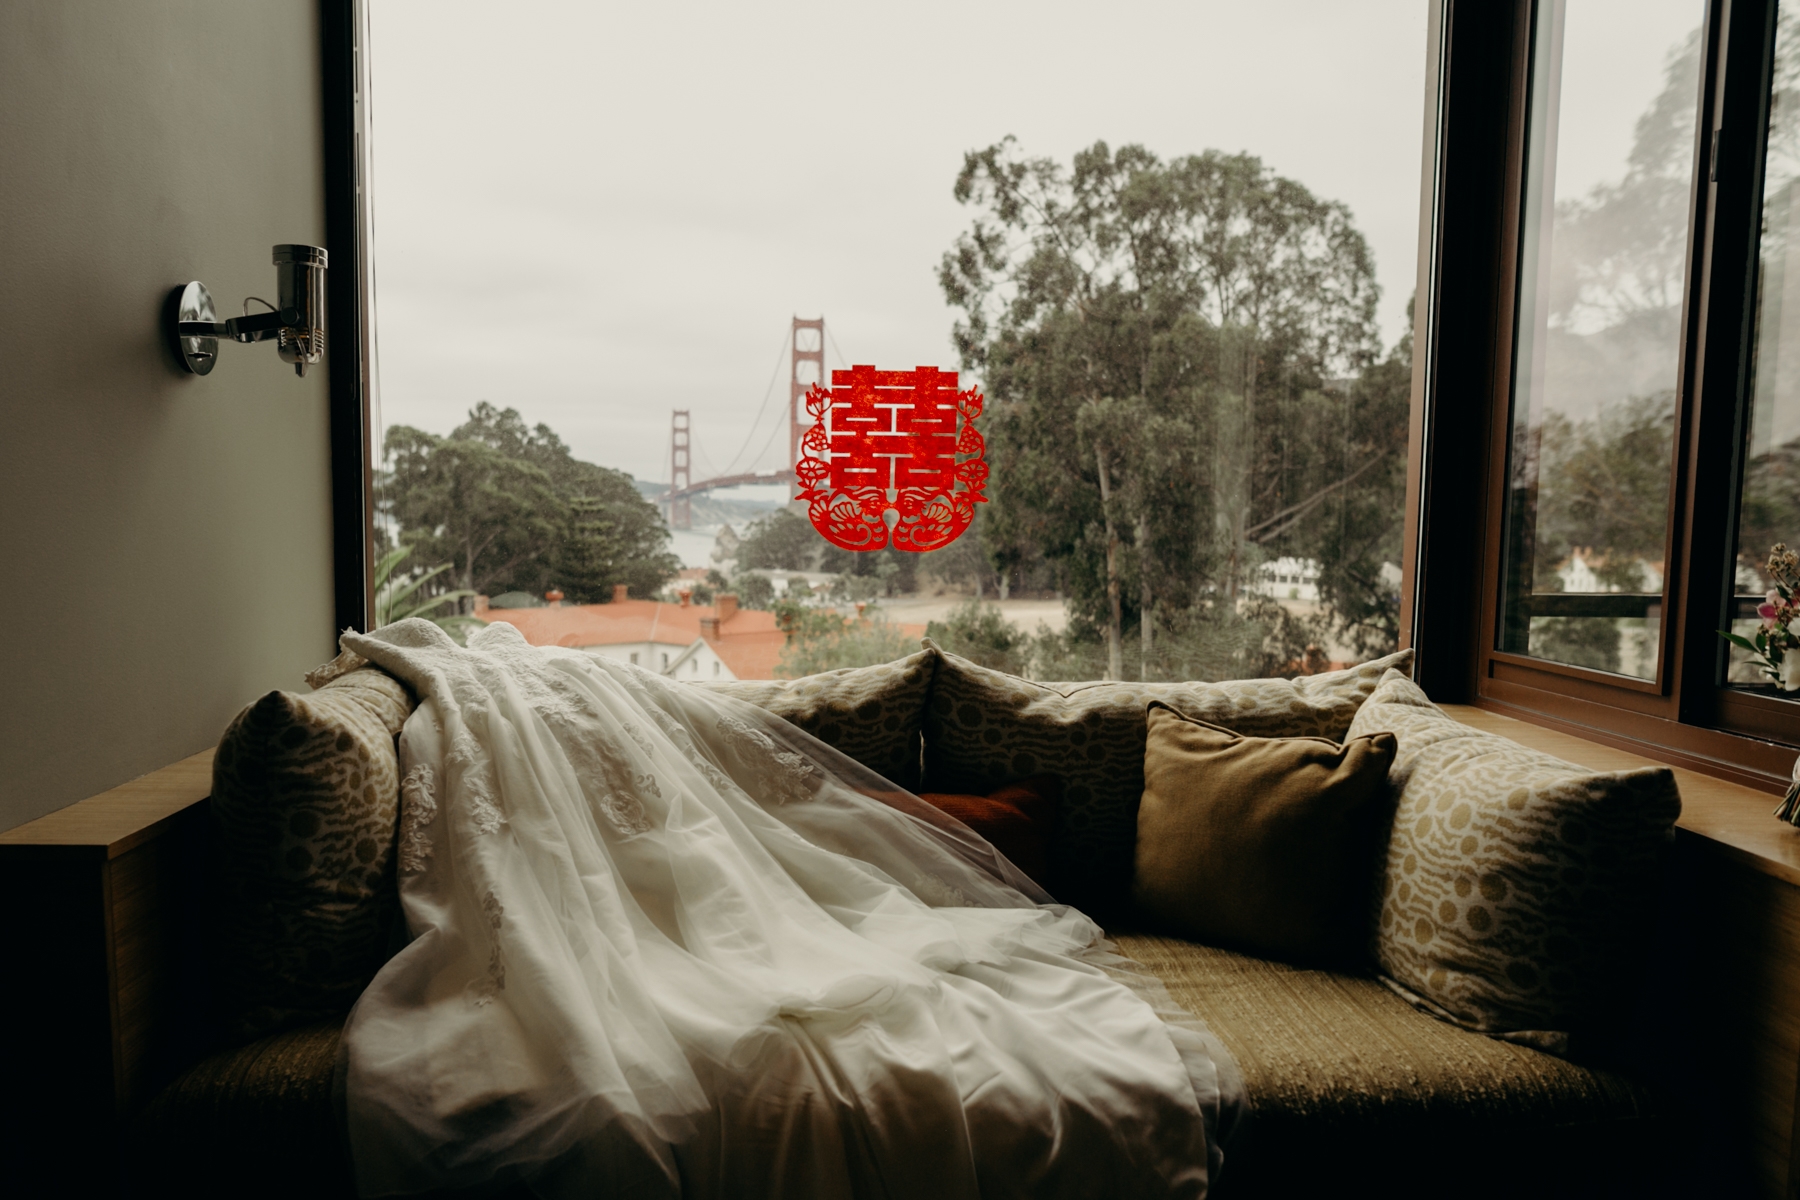 wedding dress photo with golden gate in view